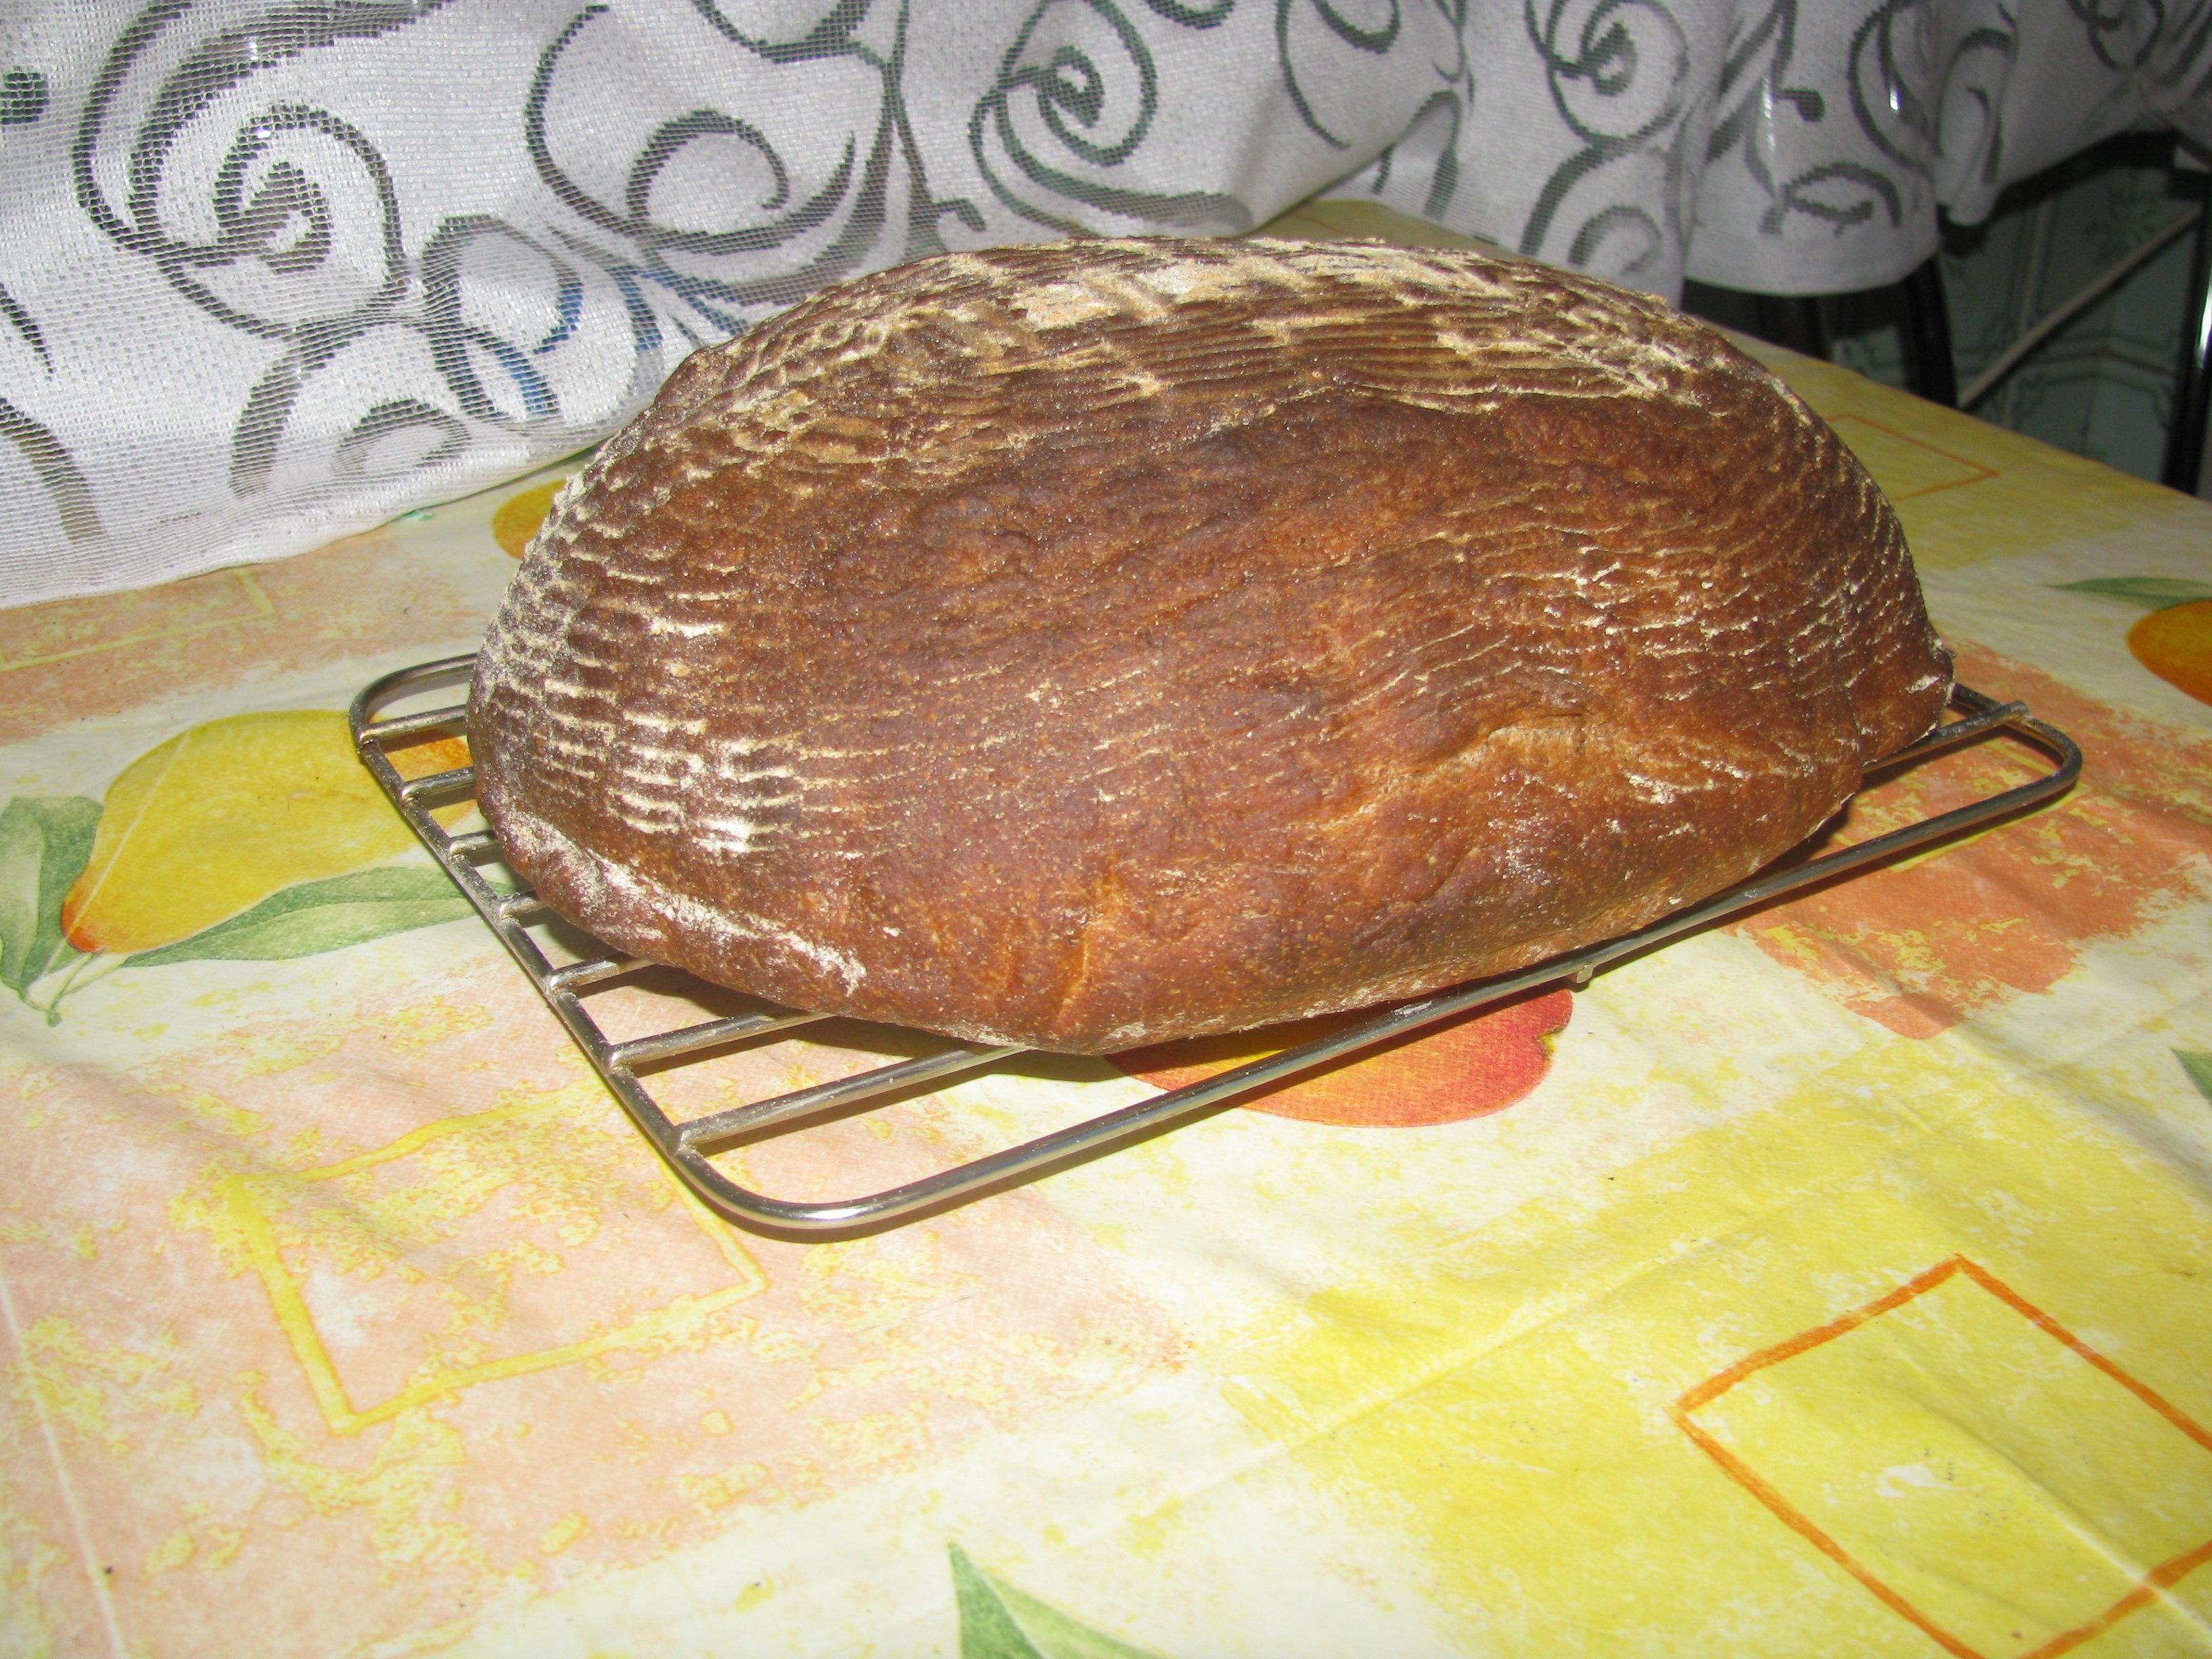 Wheat-rye bread (in the oven)